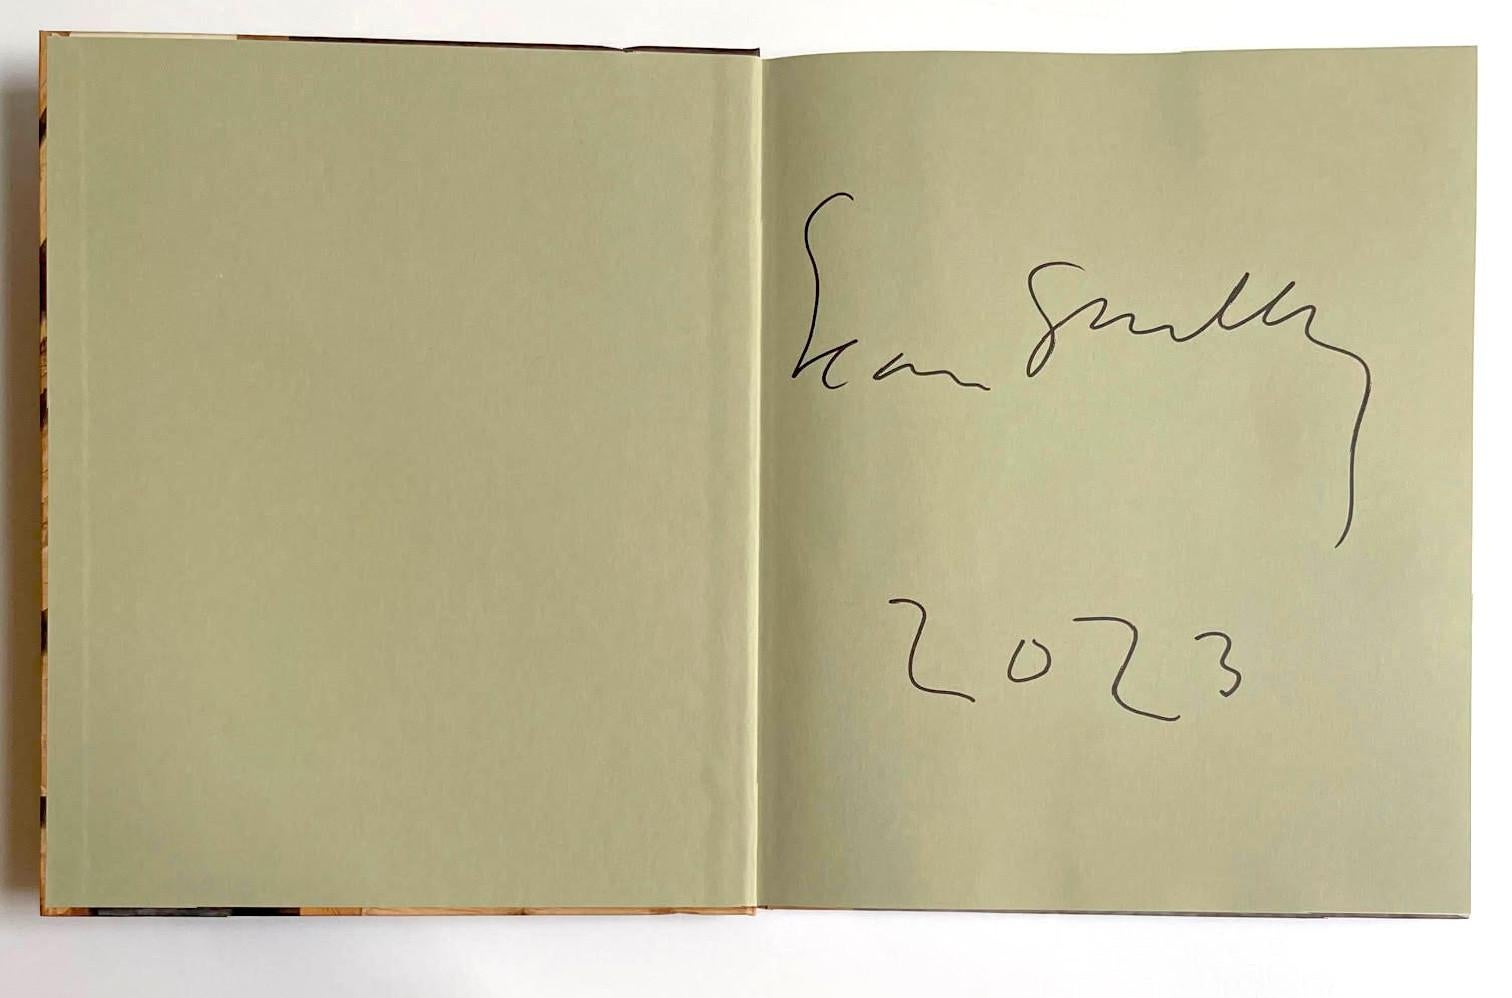 Sean Scully: Material World (Monograph Hand signed and dated by Sean Scully) For Sale 2